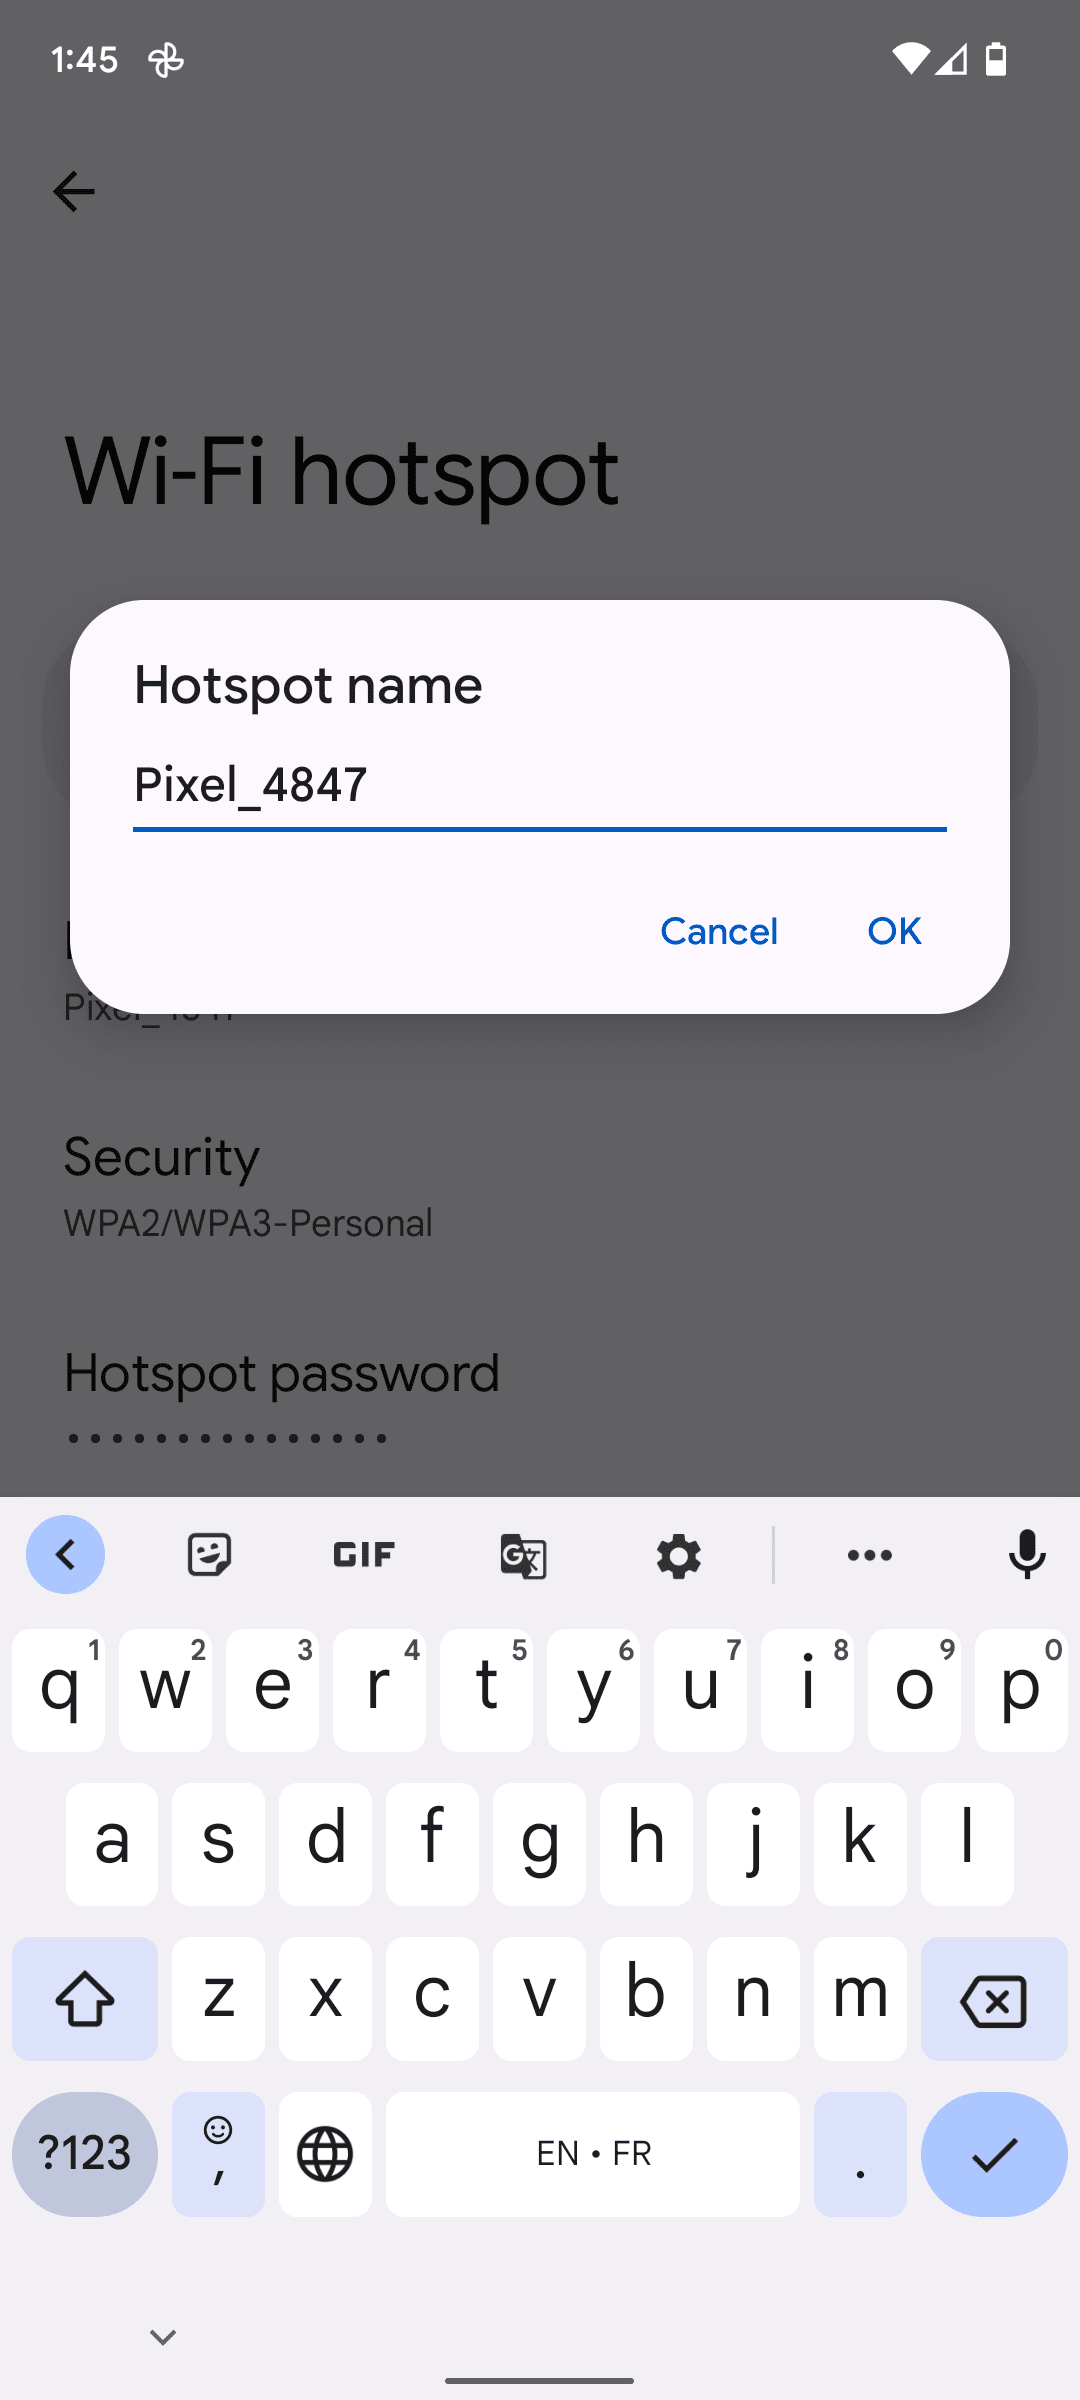 To change the hotspot name, delete the existing name and enter a new one.